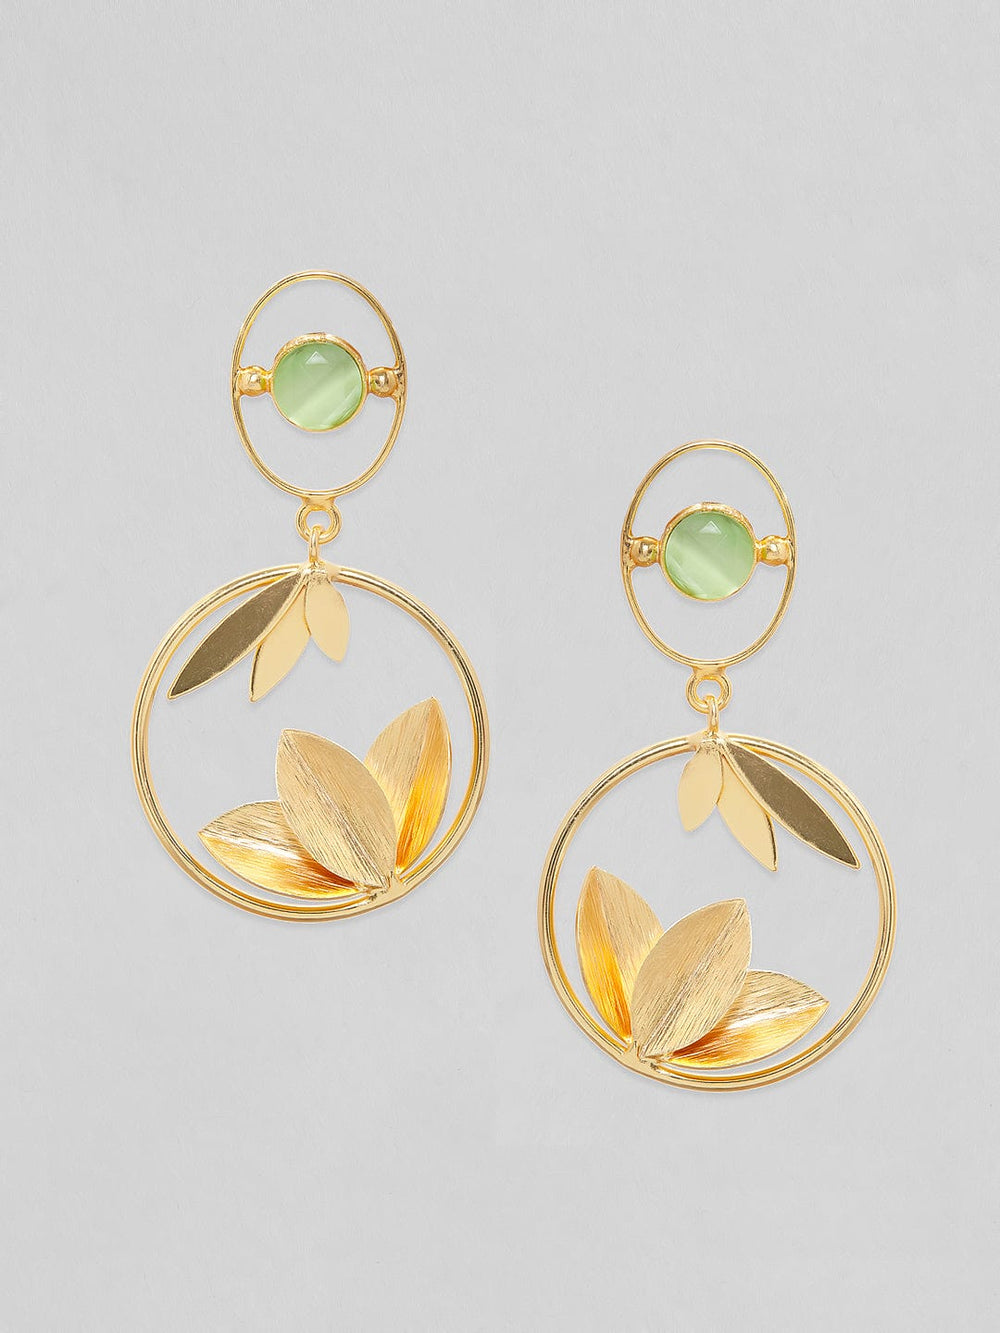 Rubans Voguish 18K Gold Plated On Copper Handcrafted With Uncut Stone And Leaf Patterns Dangle Earrings. Earrings